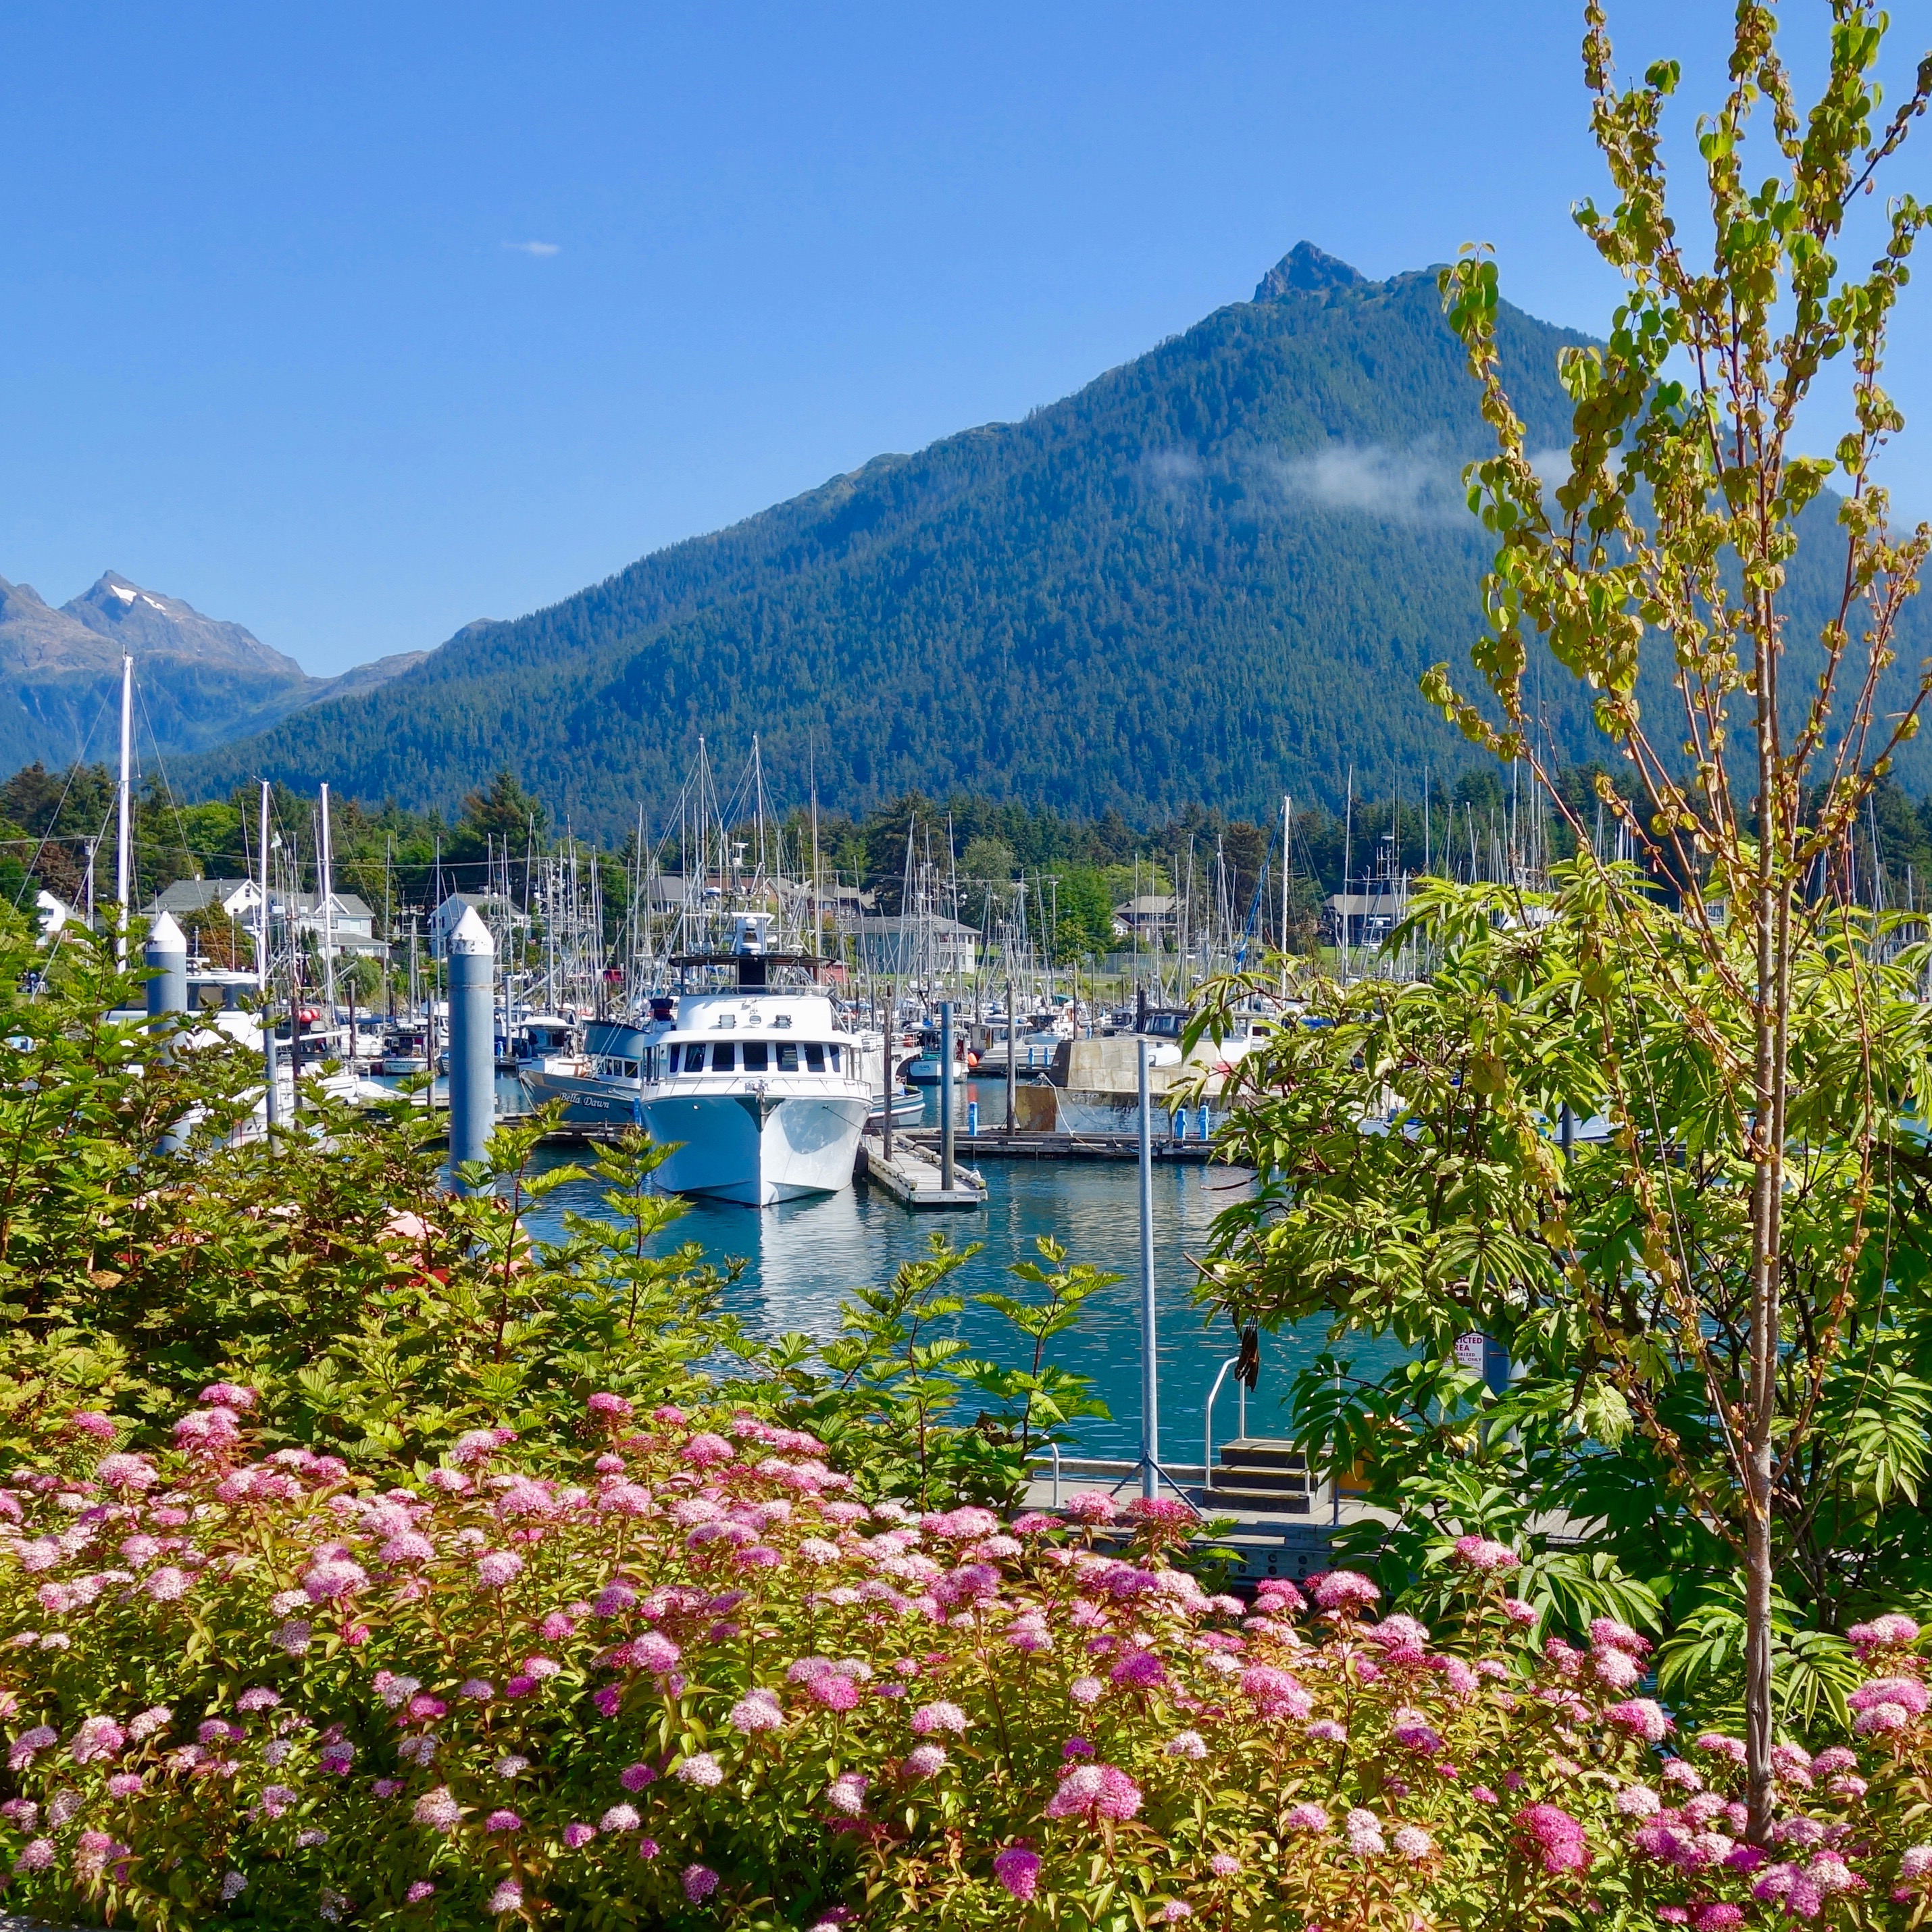 Sitka has a number of different harbors in every direction, including a cruise terminal which is about 6 miles from the main city.  